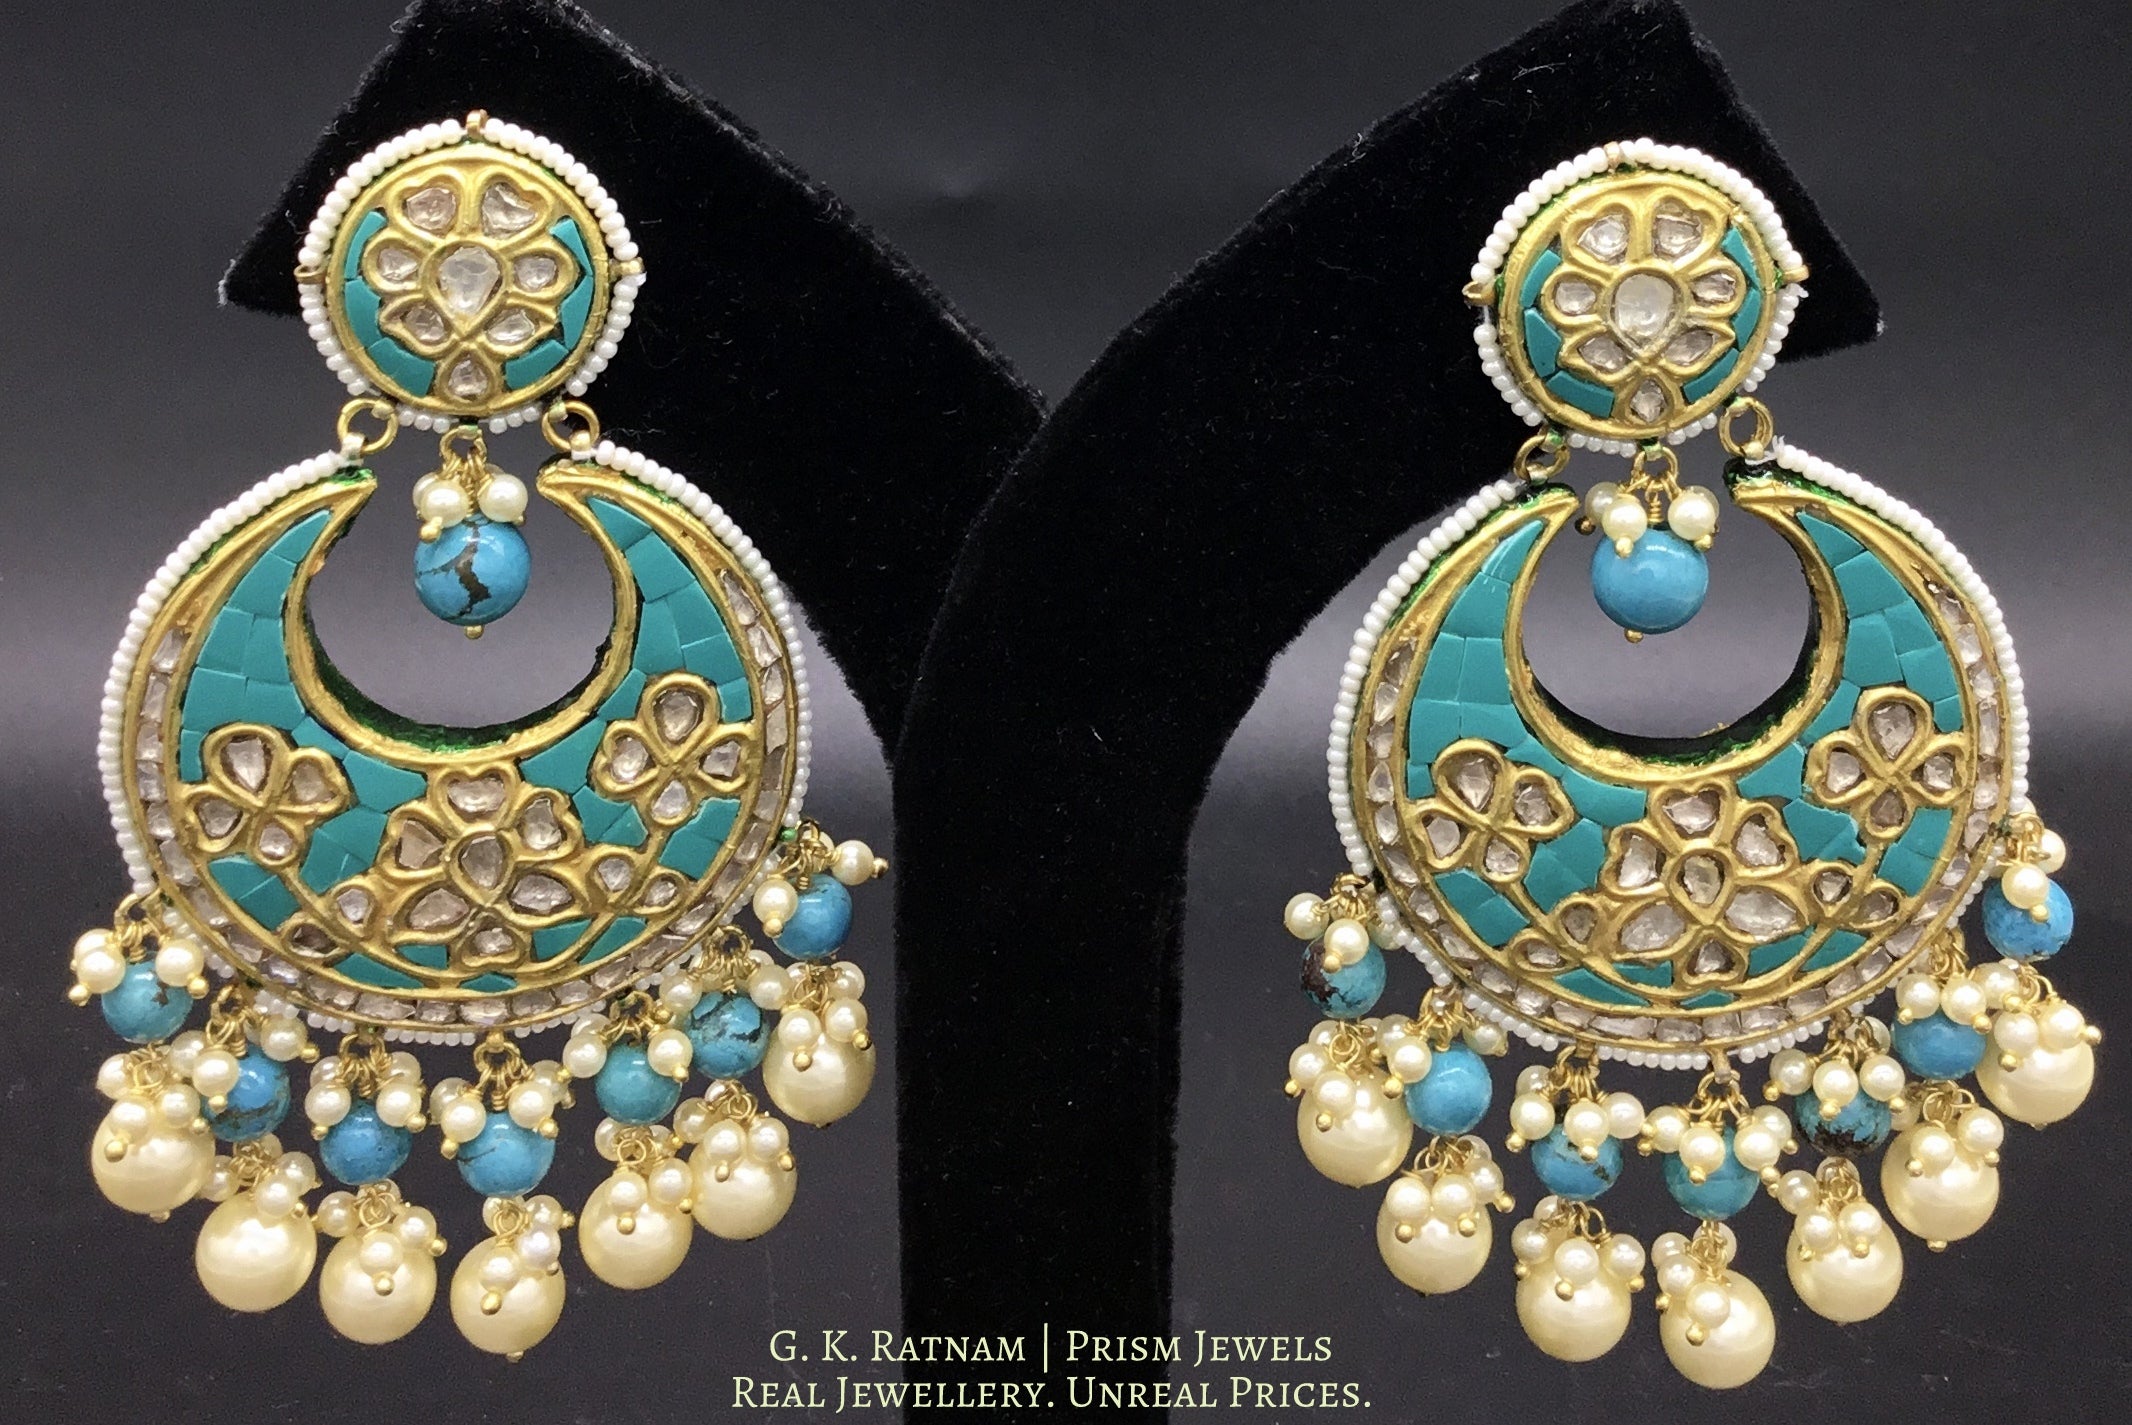 23k Gold and DIamond Polki Chand Bali Earring Pair with Turquoise Sett ...